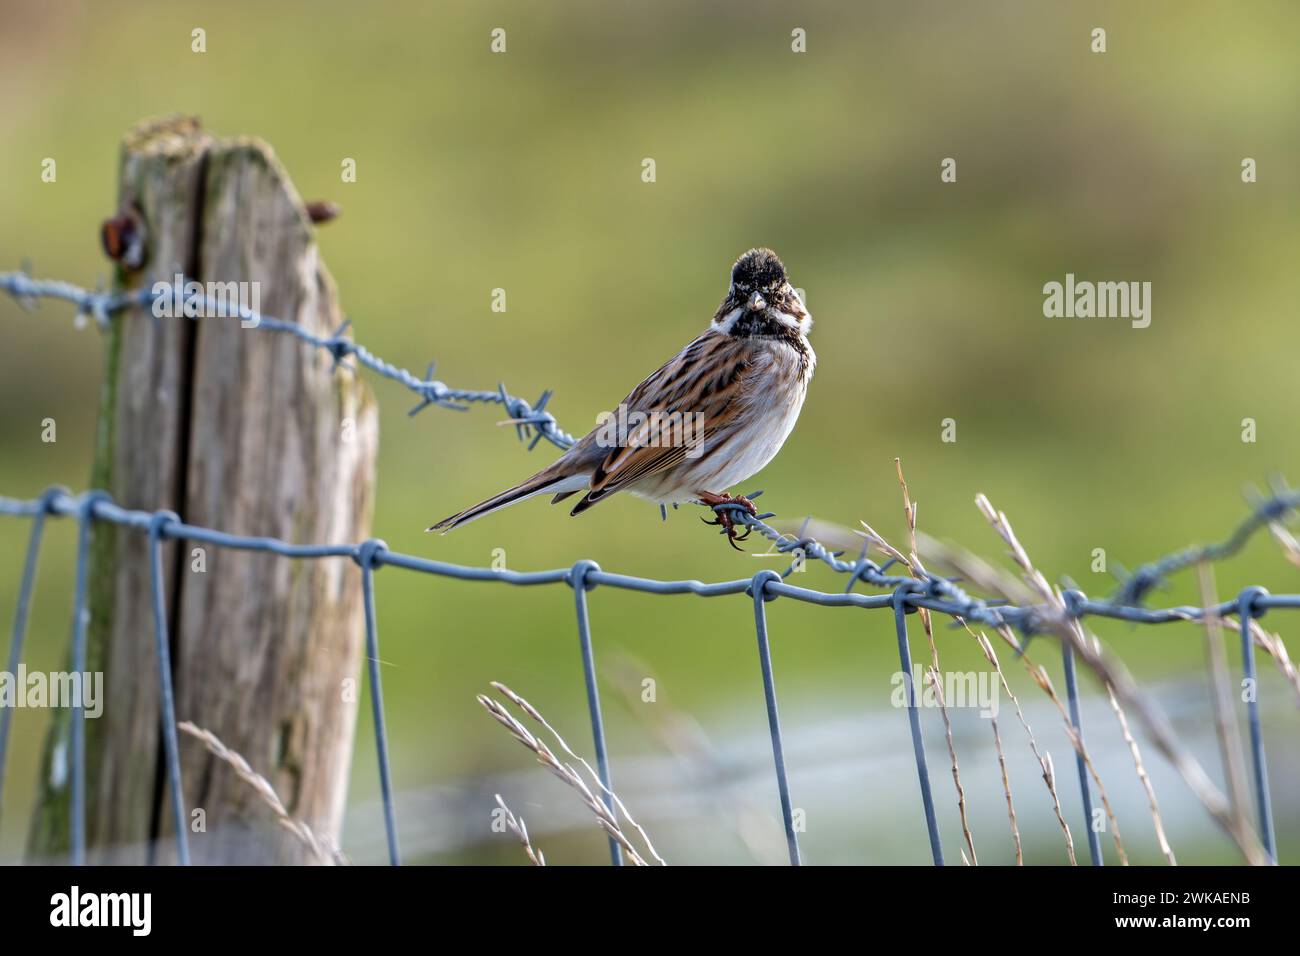 Common reed bunting (Emberiza schoeniclus) male perched on barbwire / barbed wire fence along meadow in late winter Stock Photo